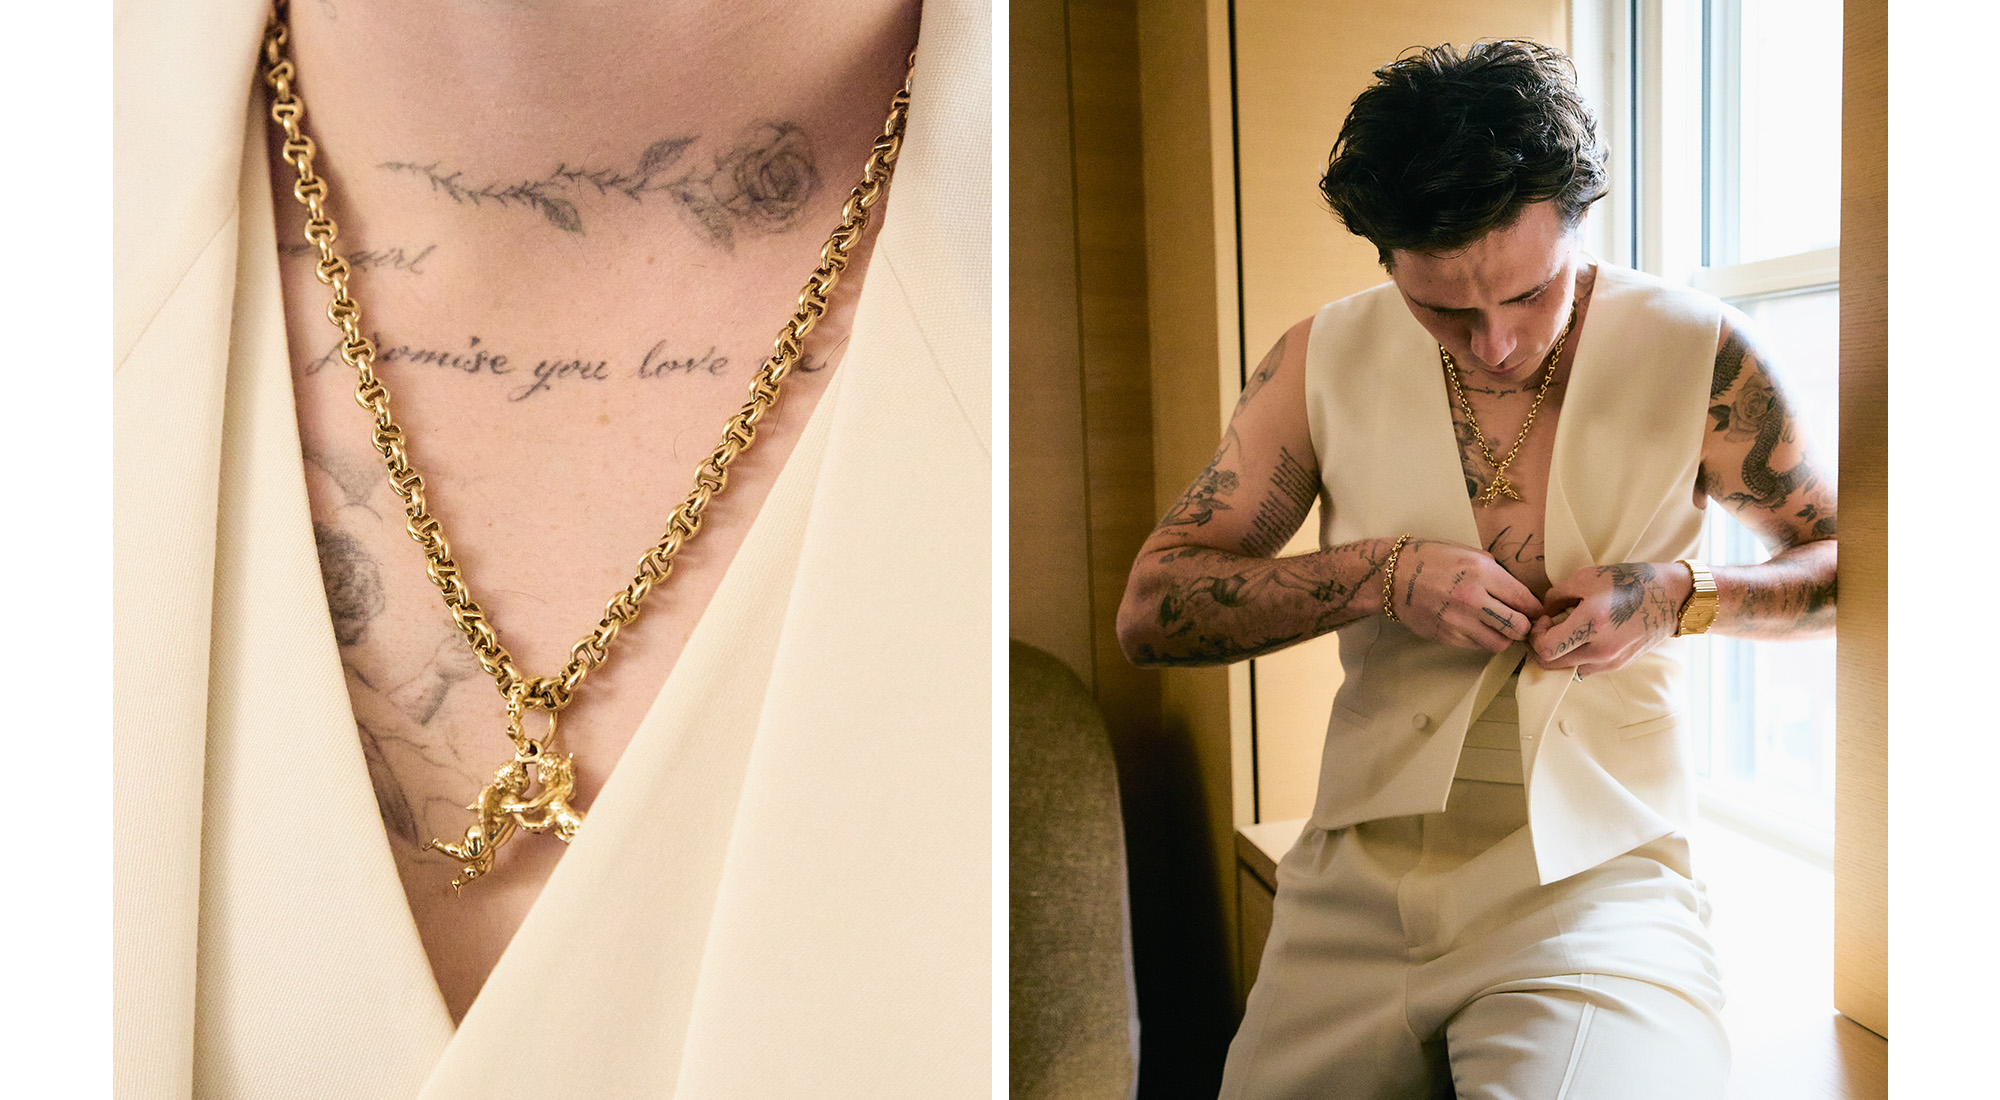 Left: Close-up of gold chain necklace and white Dior suit; Left: Brooklyn Peltz Beckham putting on white Dior suit.